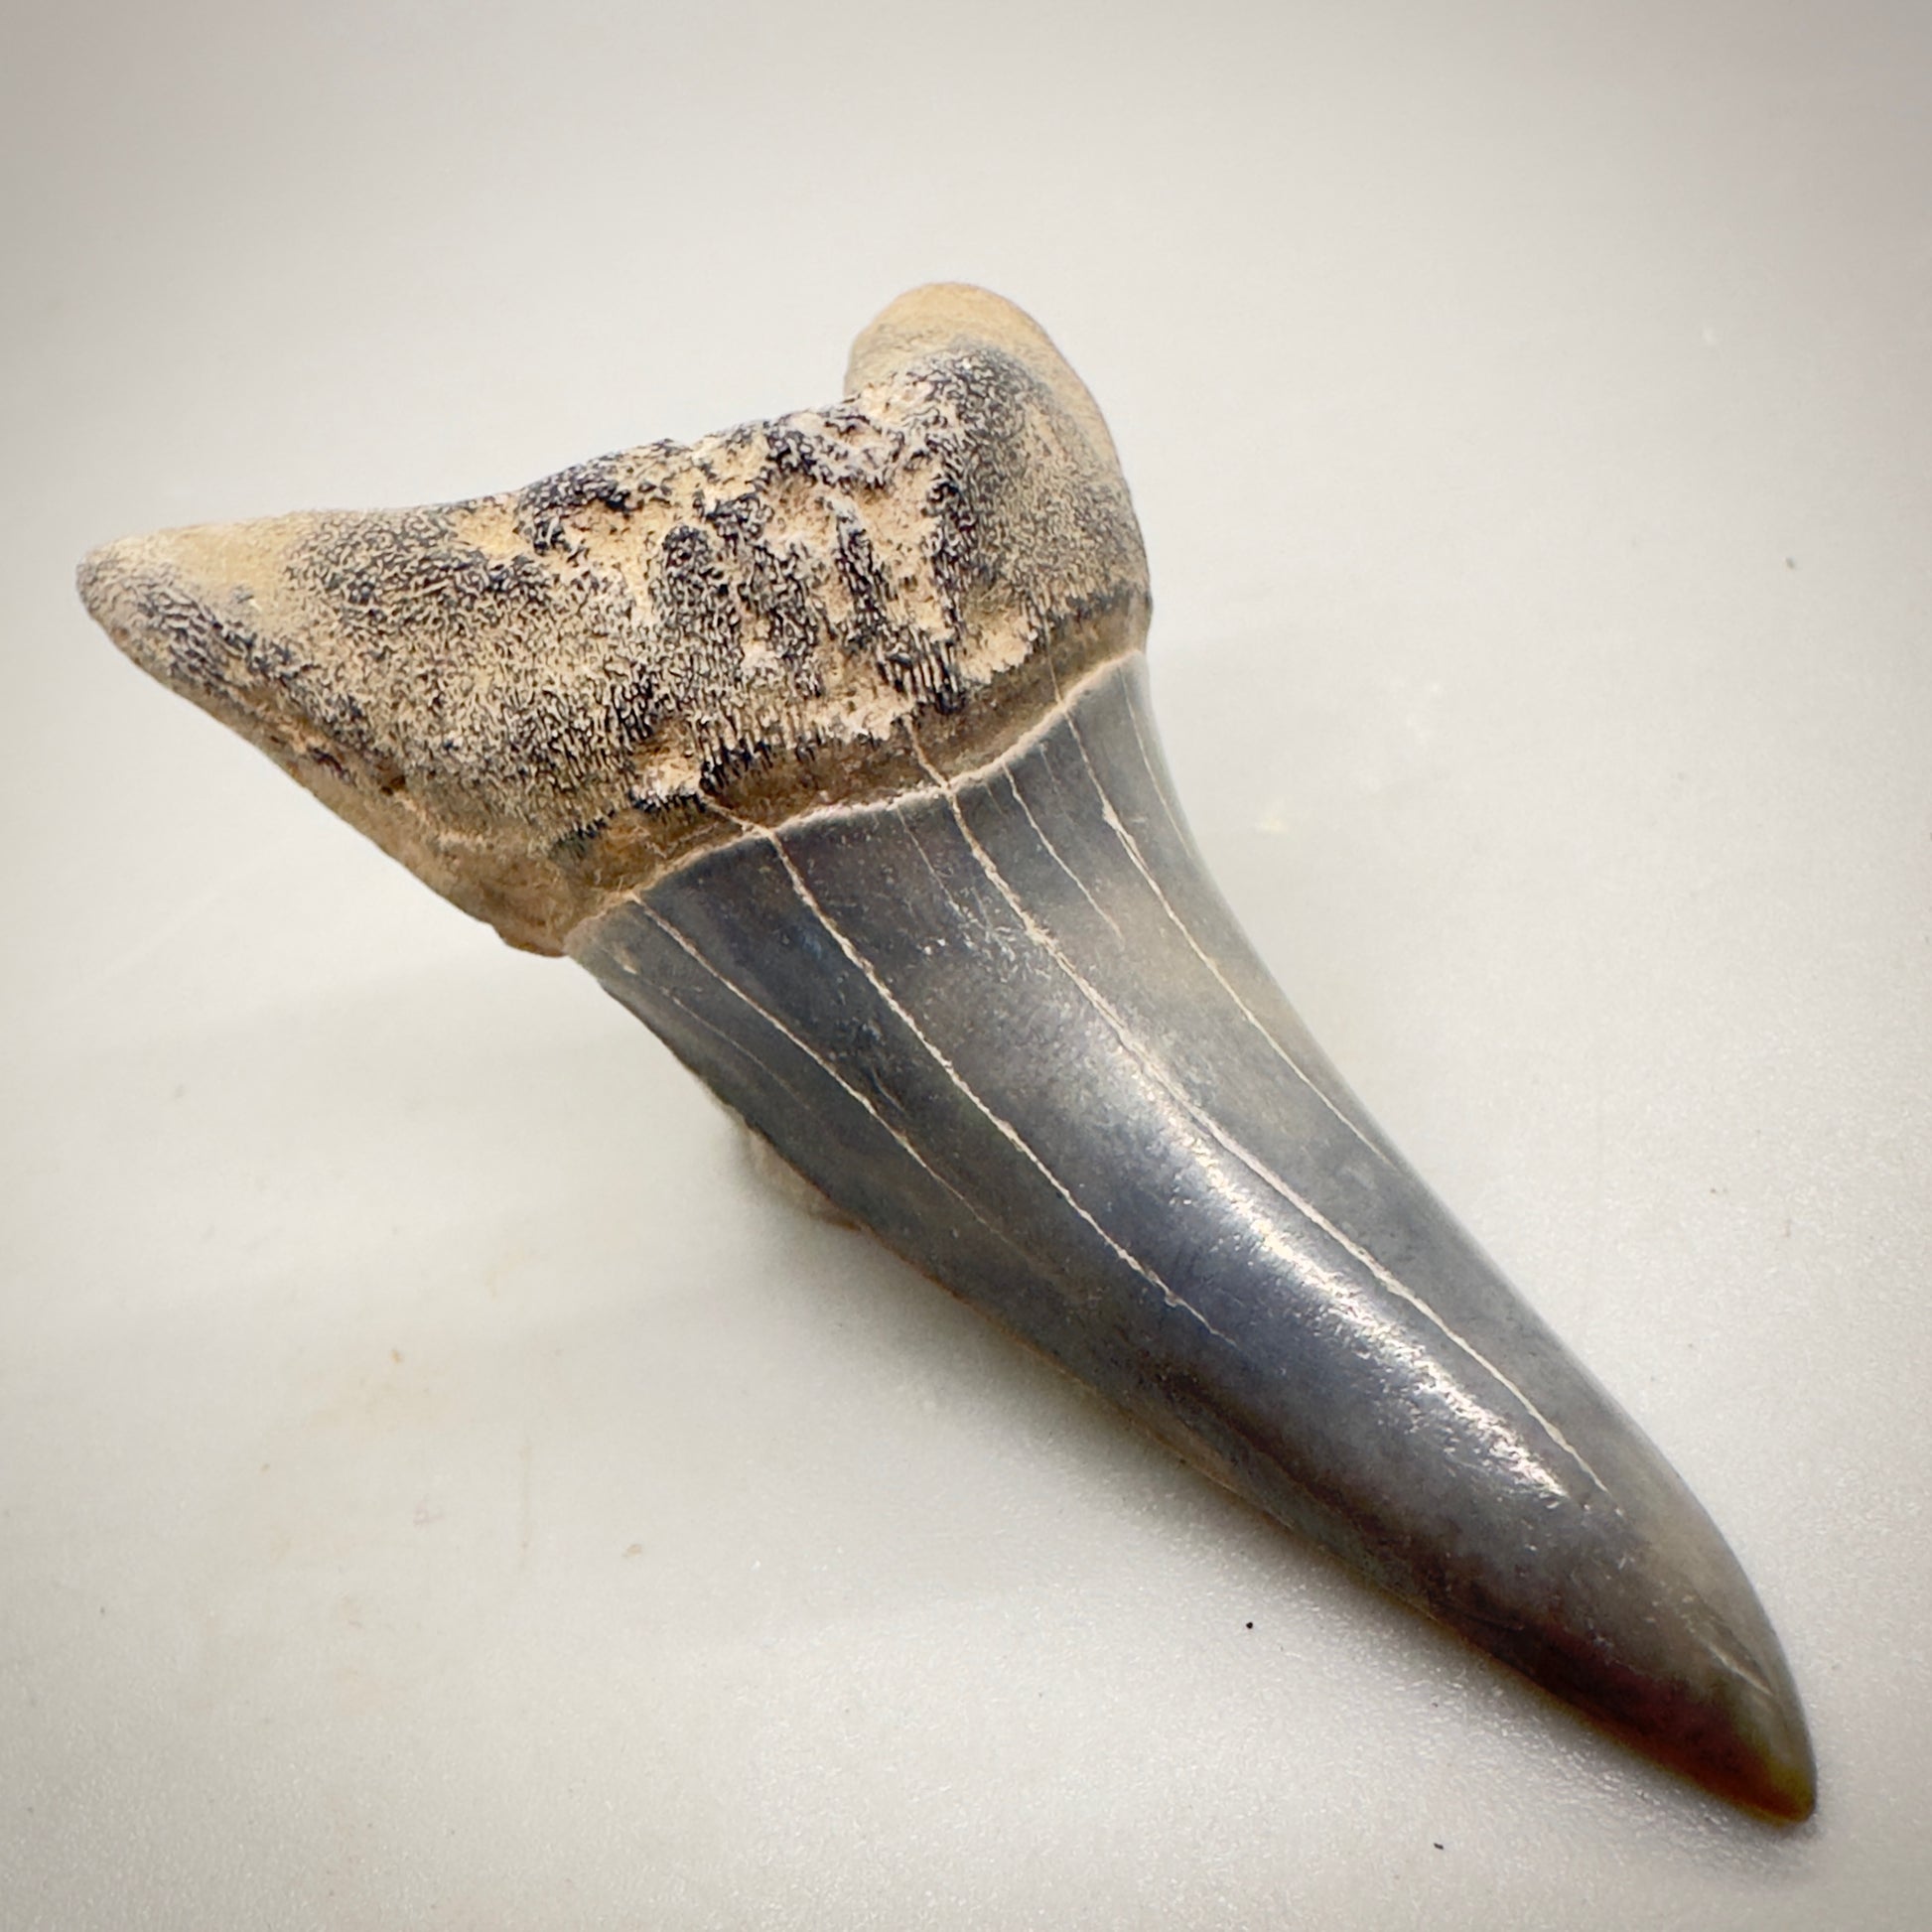 2.31 inches colorful Fossil Shortfin Mako - Isurus desori Shark tooth from Southeast, USA M23 front left